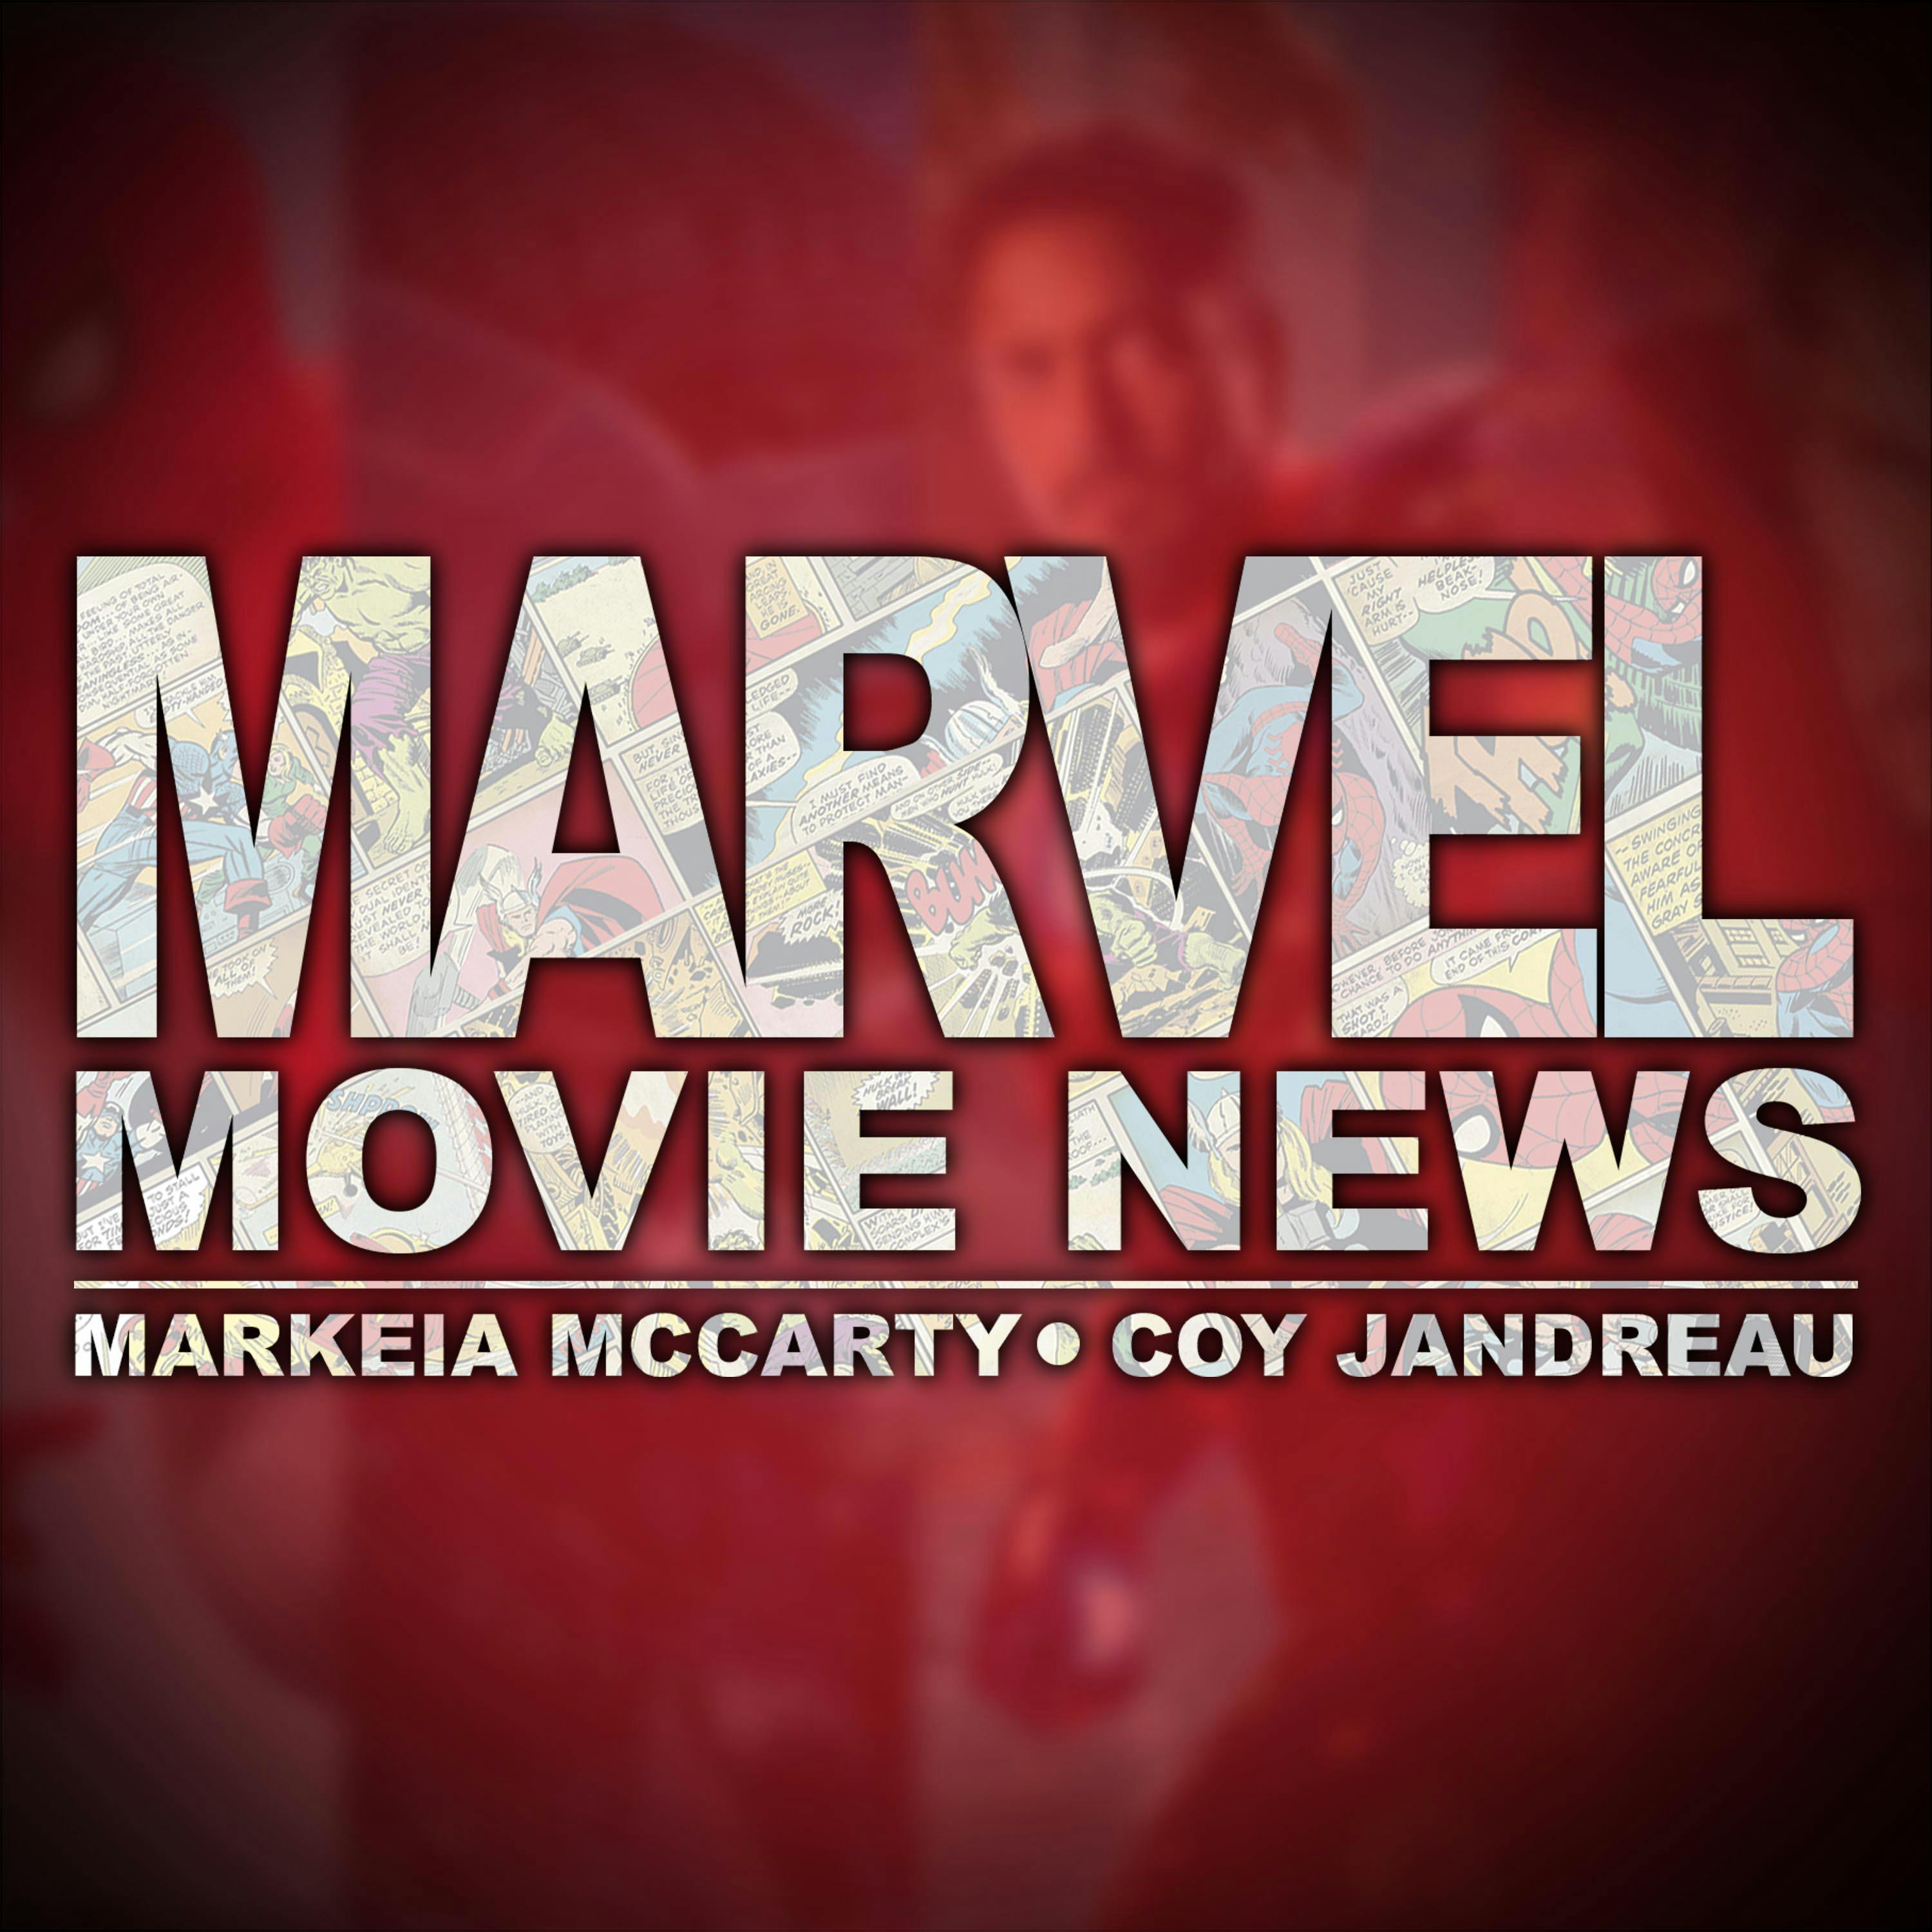 X-Men TV Series Ordered by Fox, SDCC Exclusives and More! – Marvel Movie News Ep 91